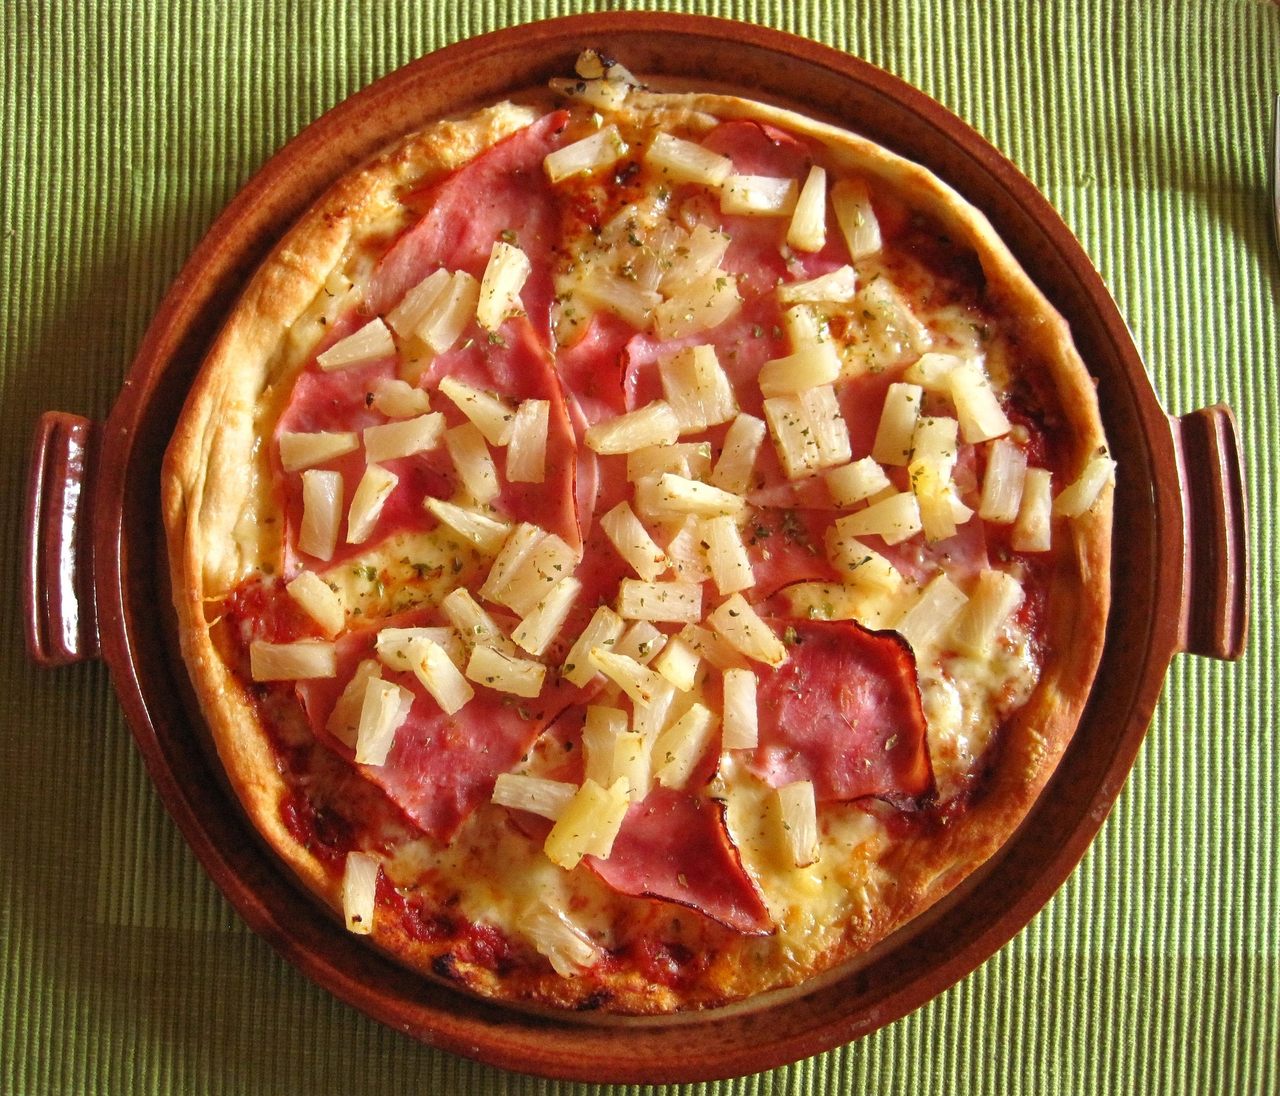 The Hawaiian pizza is actually a Canadian classic.